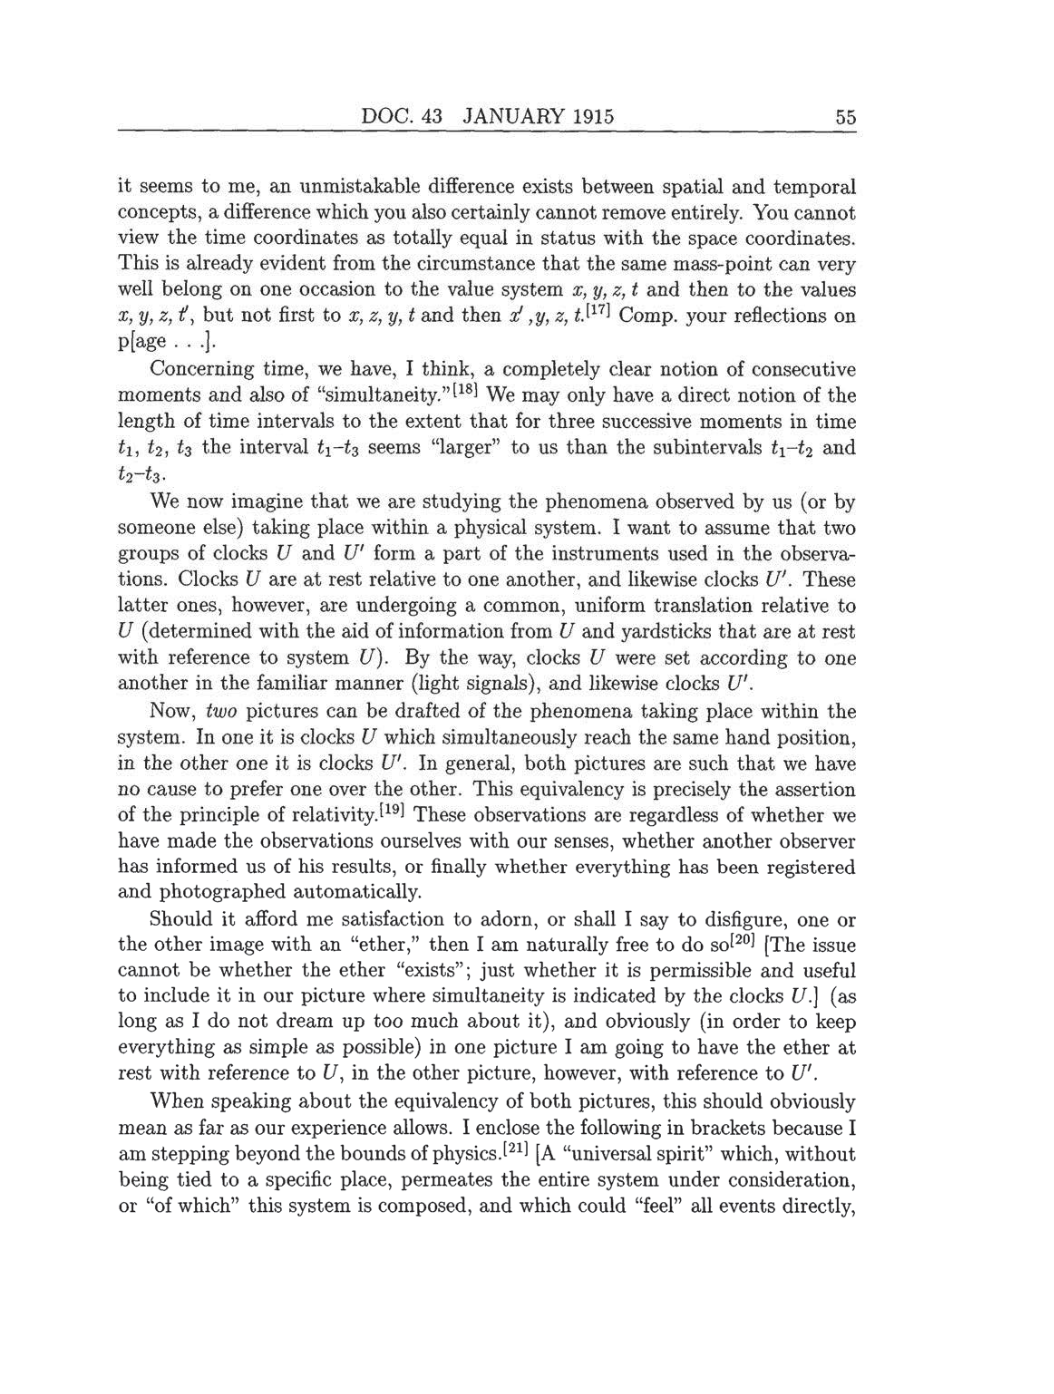 Volume 8: The Berlin Years: Correspondence, 1914-1918 (English translation supplement) page 55